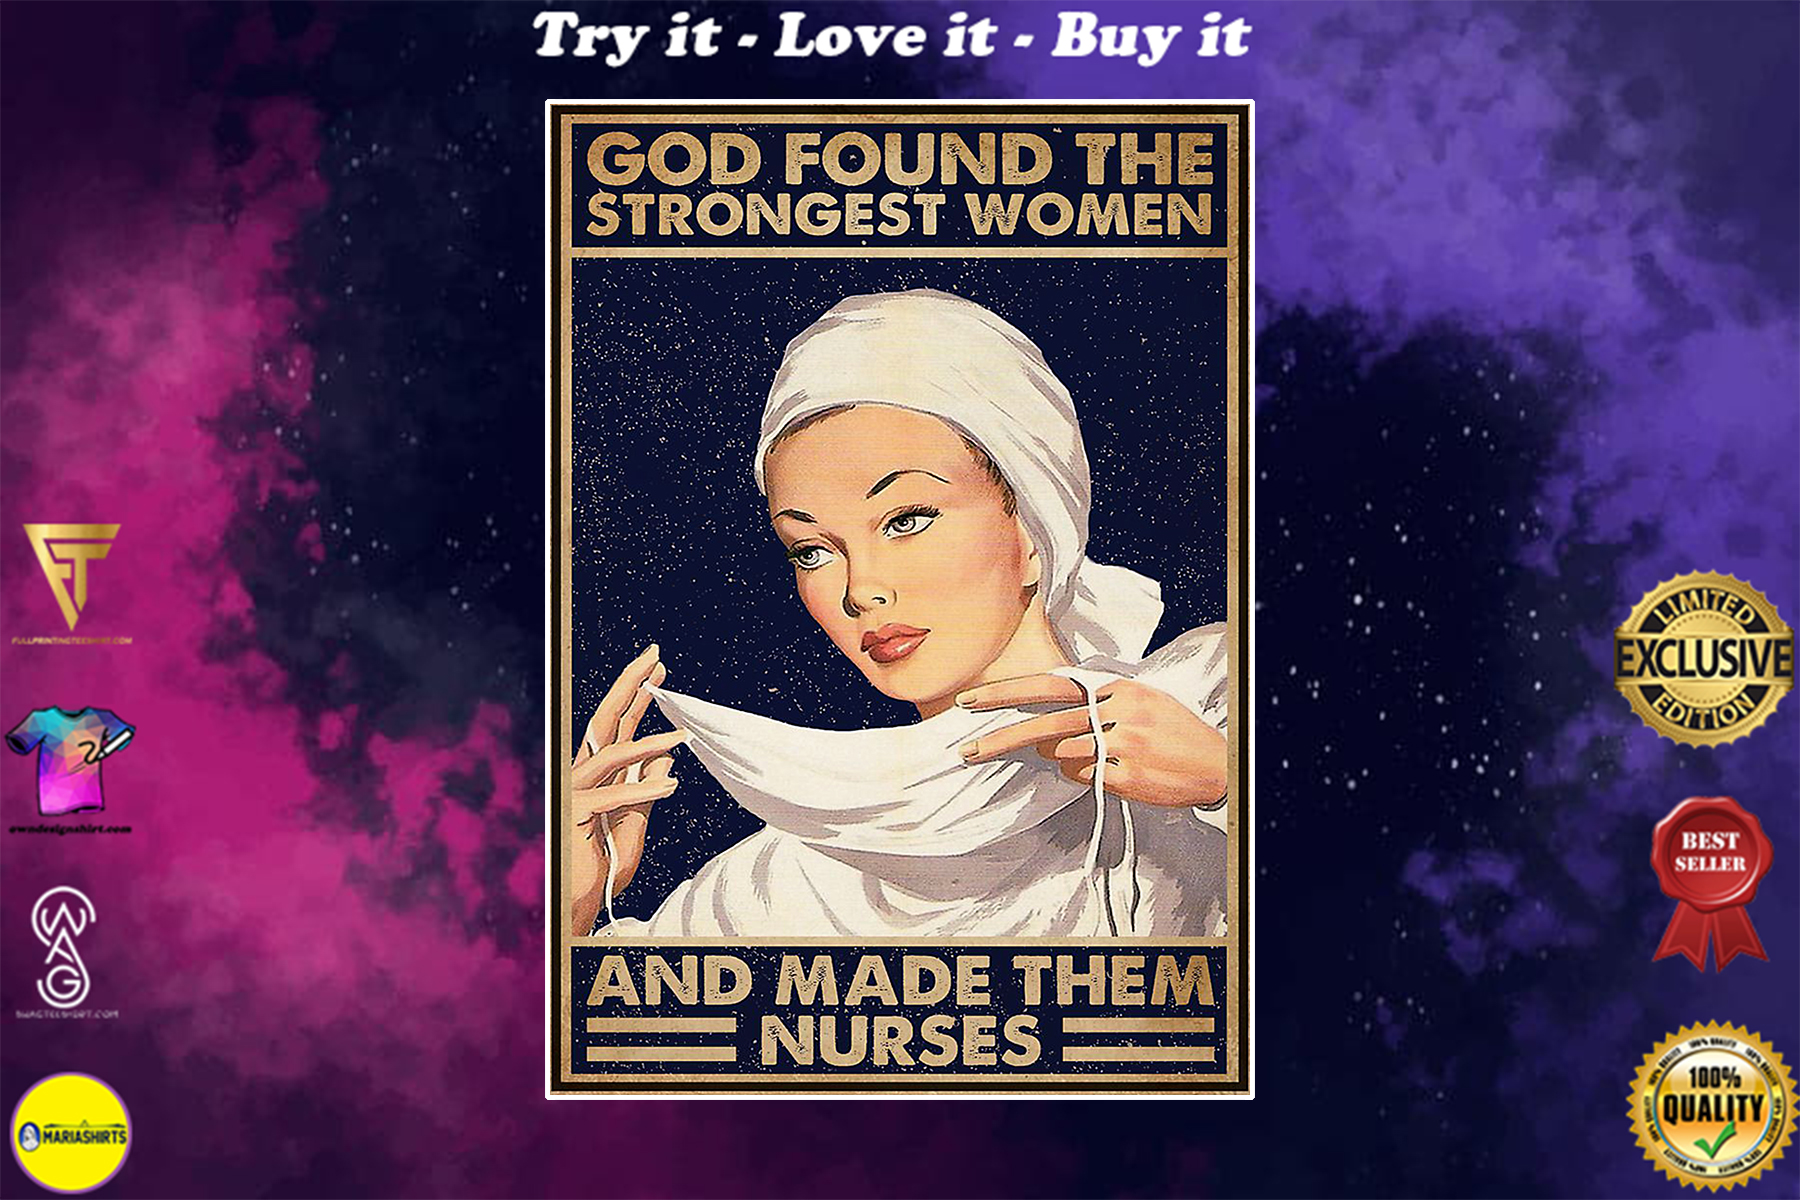 God found the strongest women and made them nurses vintage poster